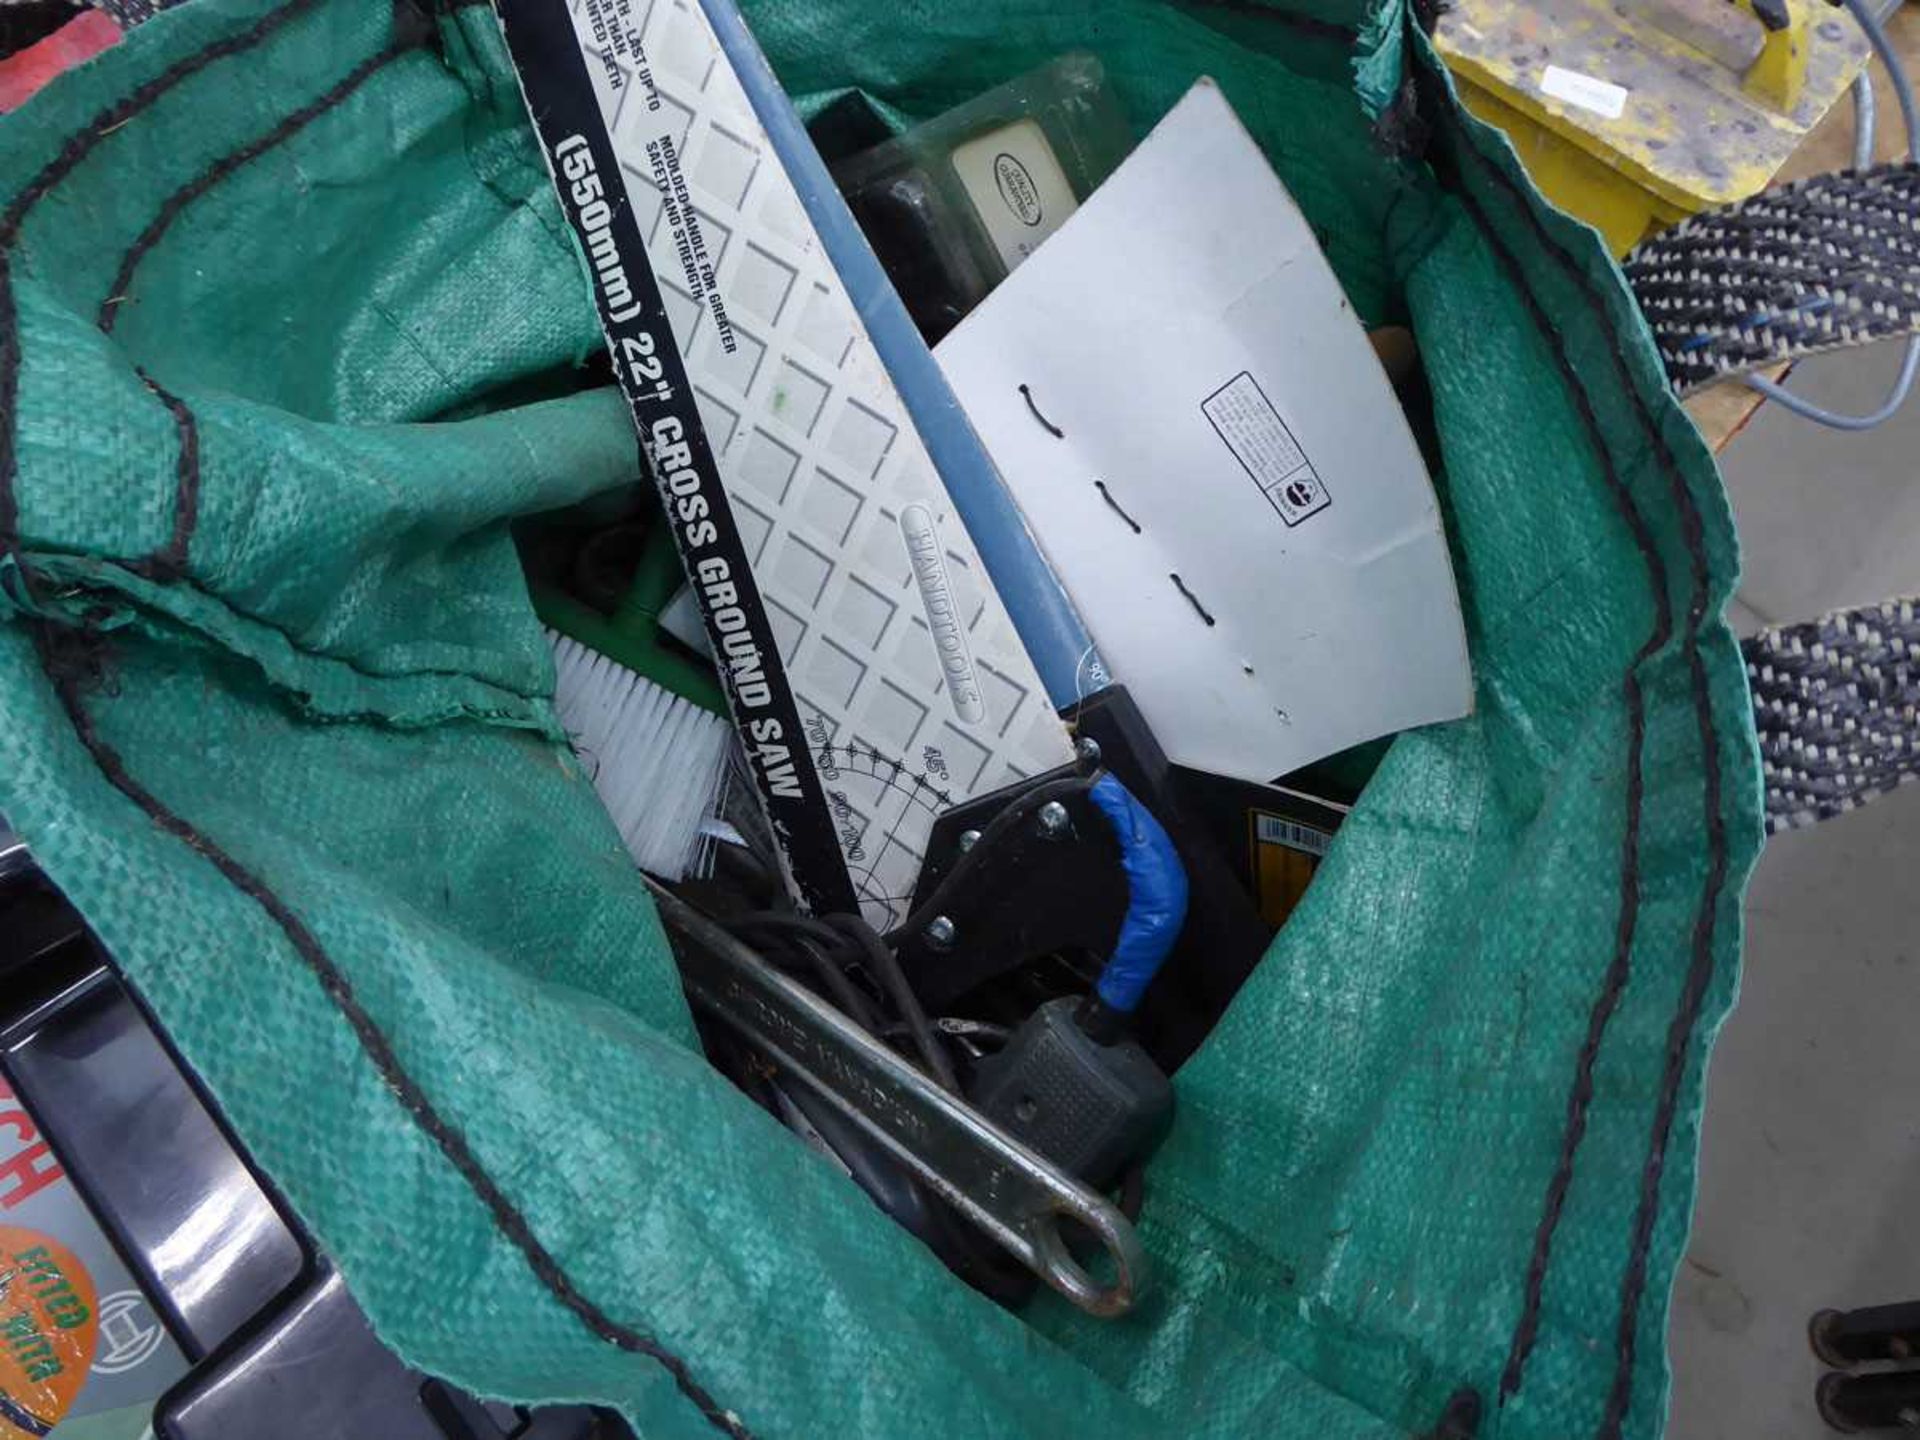 2 bags of assorted tools inc. saws, planers, drills, tile cutters and various other tools - Image 2 of 4